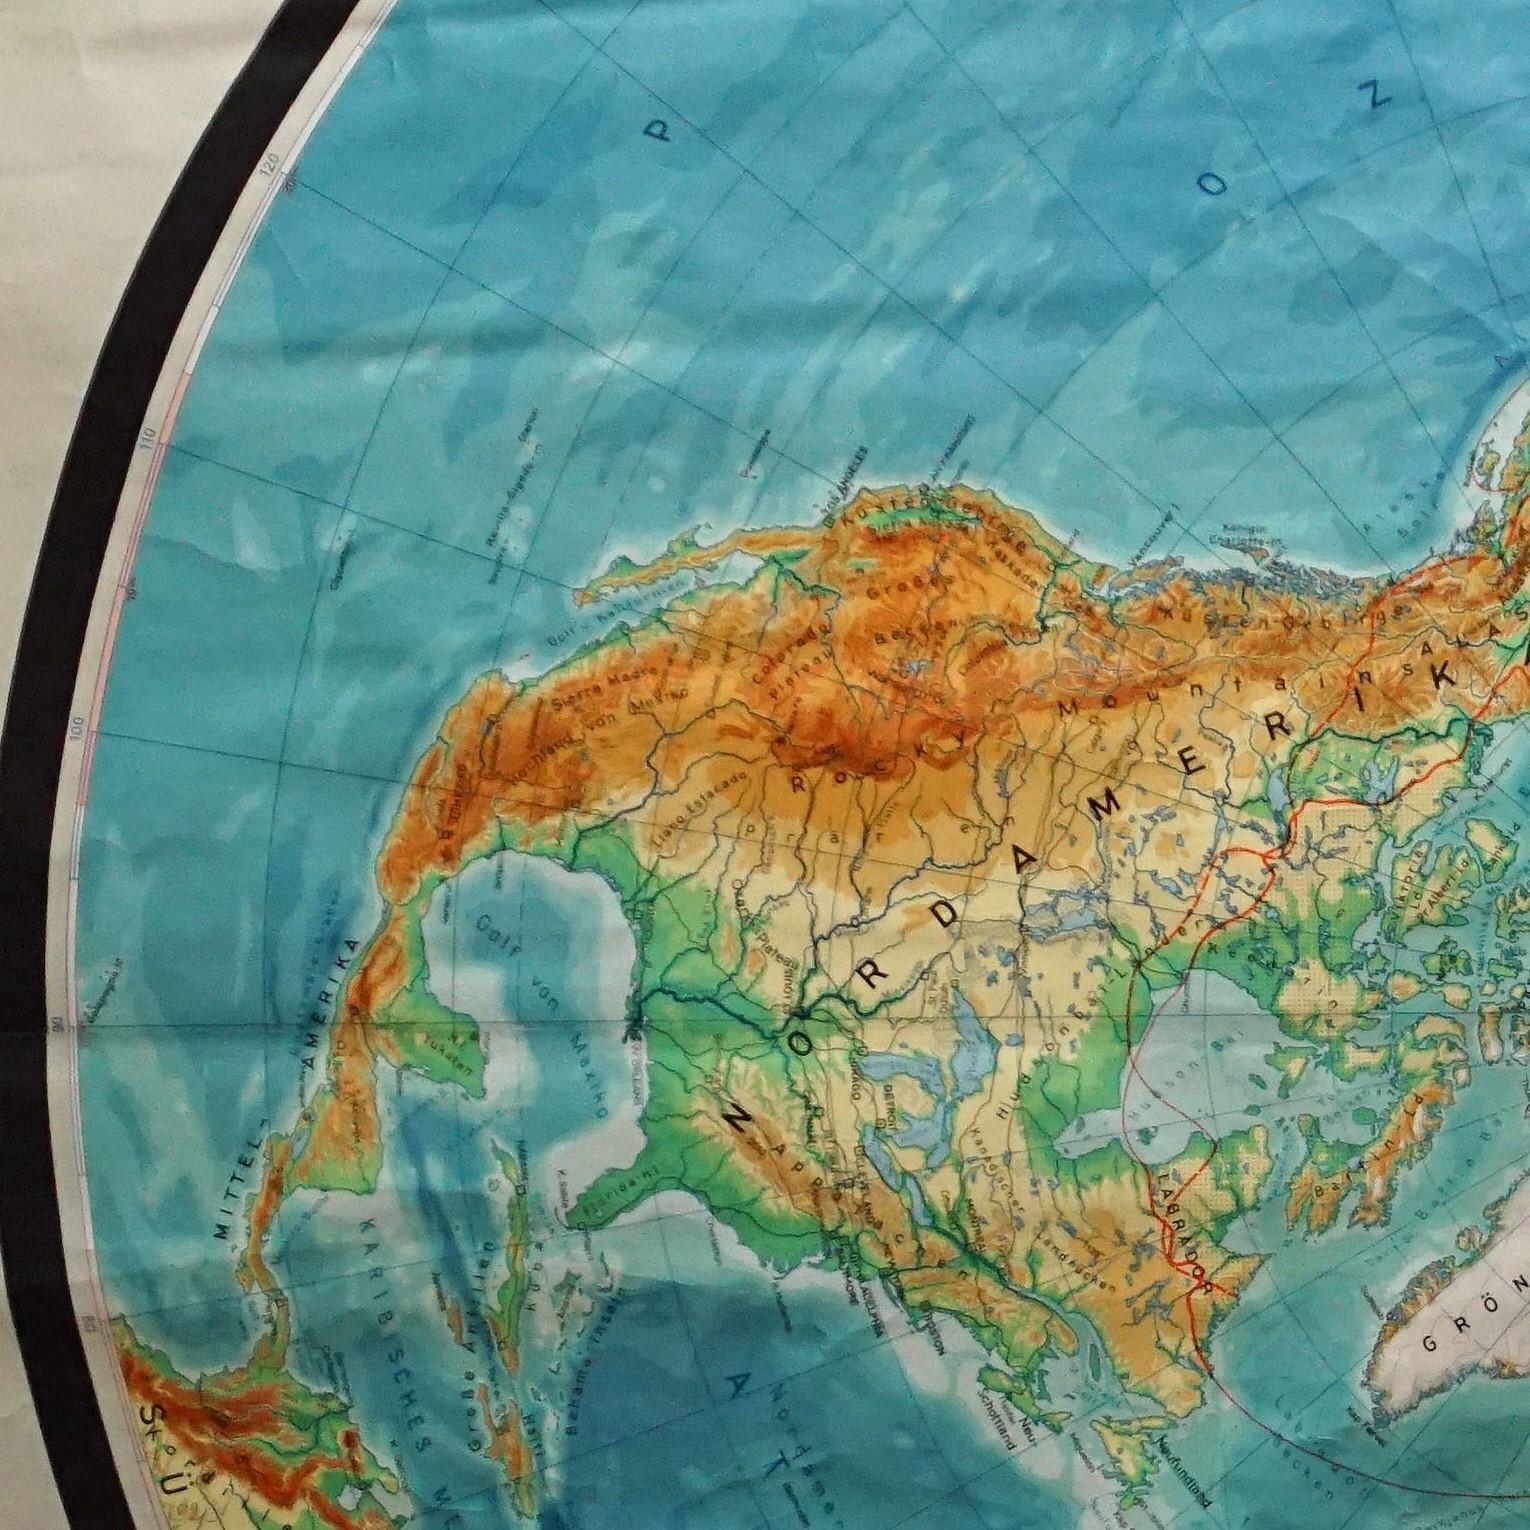 A great pull-down map or vintage wall chart illustrating the northern hemisphere of the earth. Published by Prof. Dr. C. Troll, Flemmings Verlag Hamburg. Colorful print on paper reinforced with canvas.
Measurements:
Width 170cm (66.93 inch)
Height